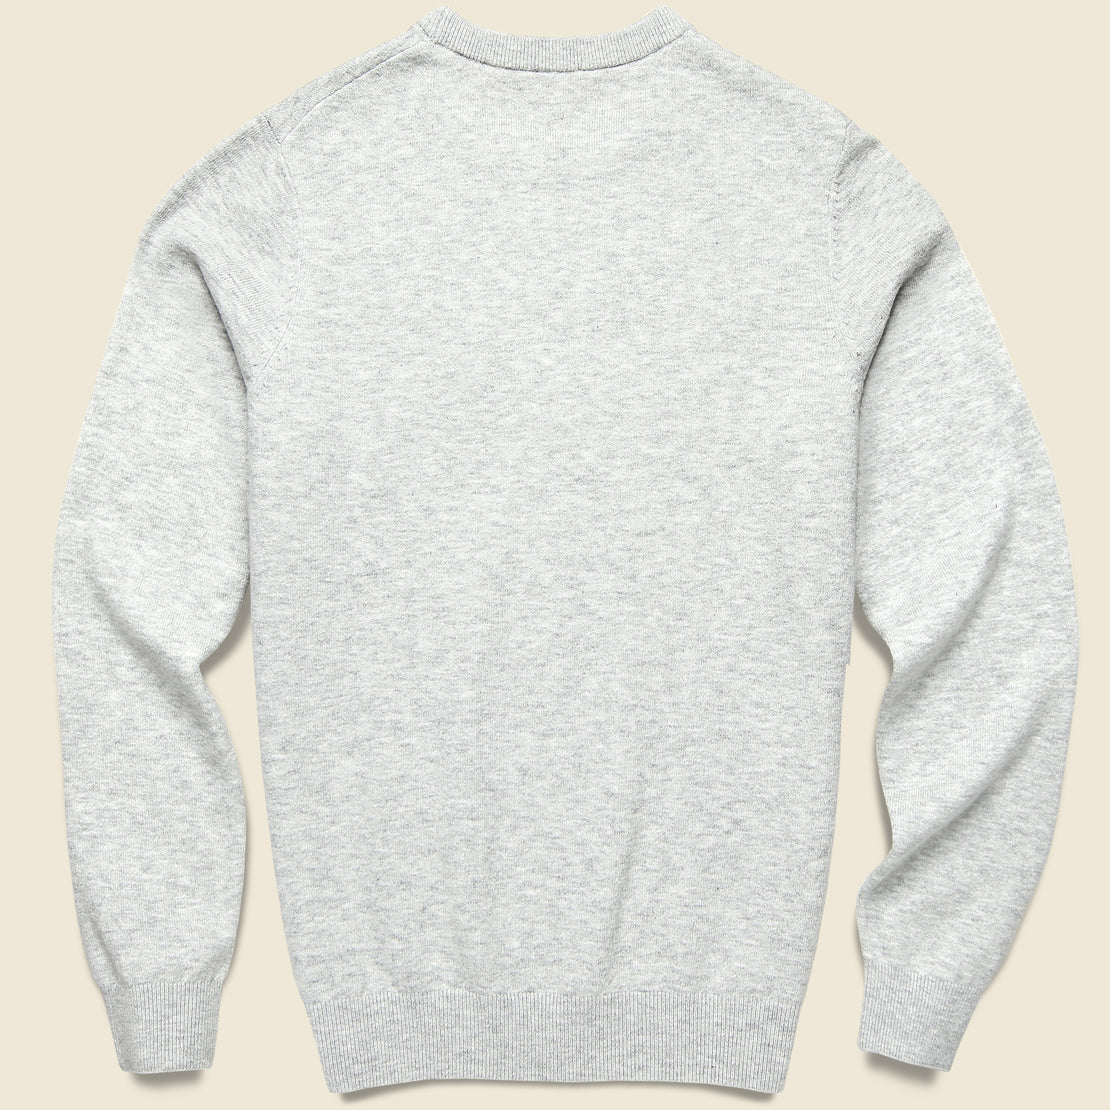 Jackson Crew Sweater - Ivory Ice Heather - Faherty - STAG Provisions - Tops - Sweater